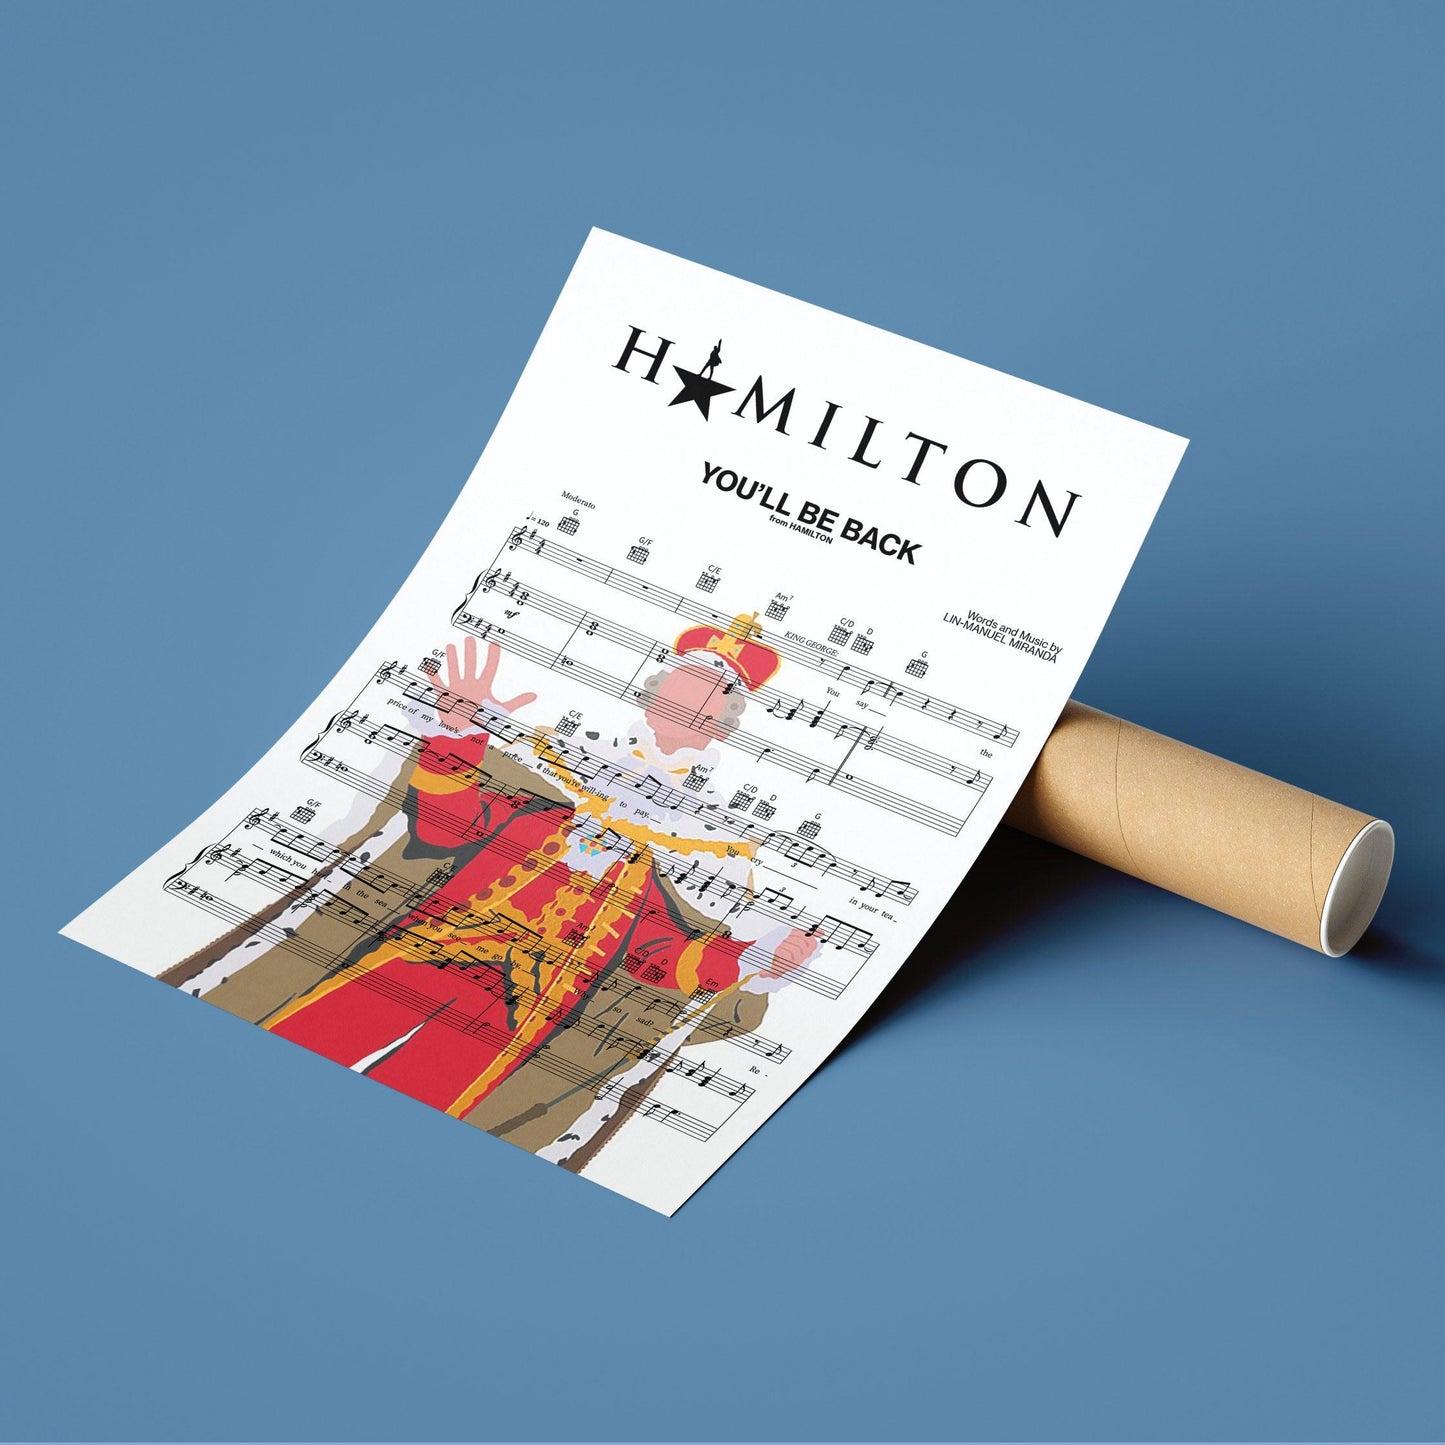 Hamilton - YOU’LL BE BACK Song Music Print | Song Music Sheet Notes Print  Everyone has a favorite song and now with Hamilton - YOU’LL BE BACK you can show the score as printed staff. The personal favorite song sheet print shows the song chosen as the score. 